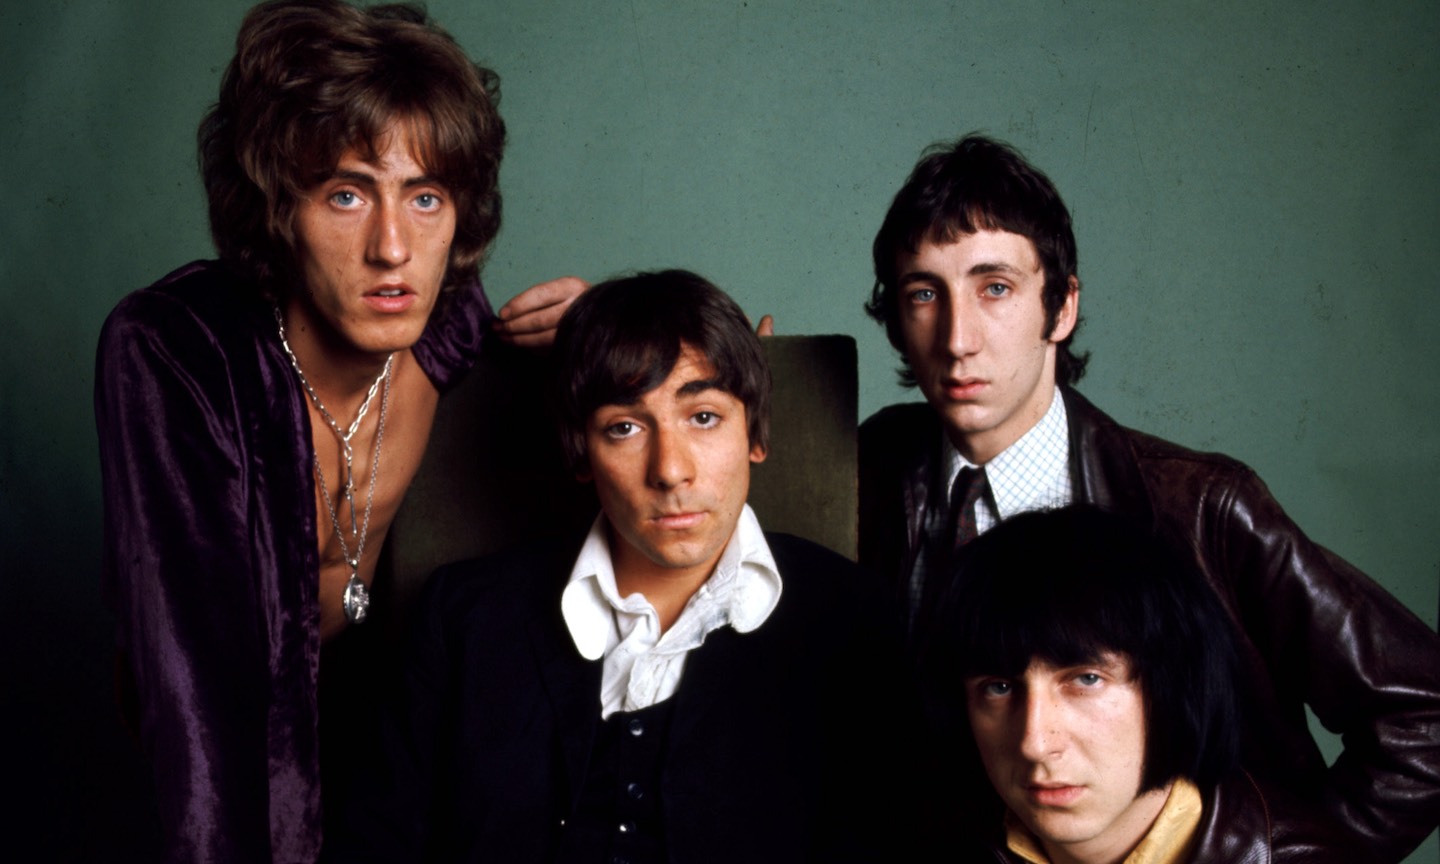 ‘Magic Bus’: The Hit Pete Townshend Called ‘The Who At Their Early Best’